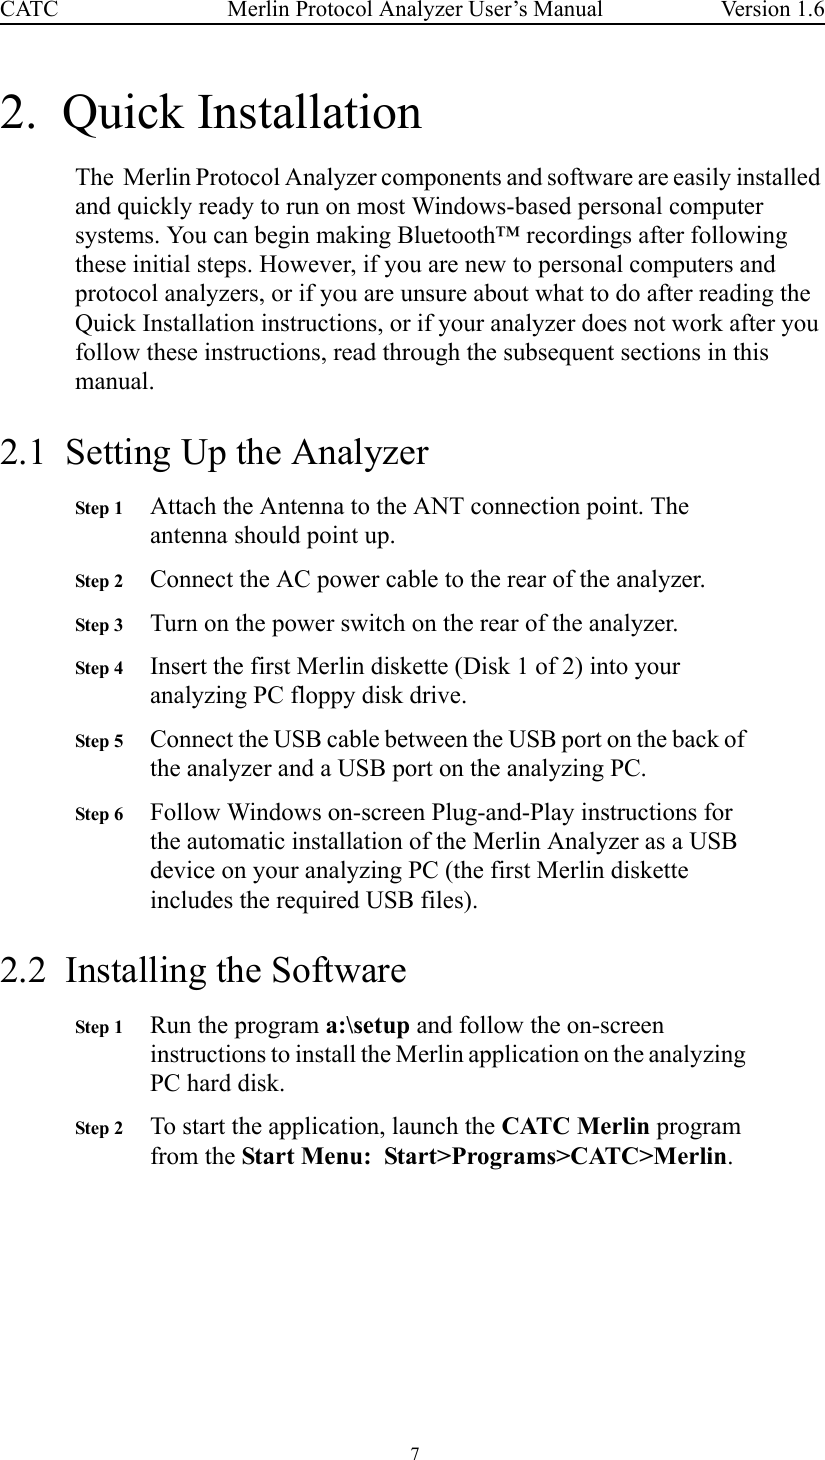  7 Merlin Protocol Analyzer User’s ManualCATC Version 1.62.  Quick Installation The  Merlin Protocol Analyzer components and software are easily installed and quickly ready to run on most Windows-based personal computer systems. You can begin making Bluetooth™ recordings after following these initial steps. However, if you are new to personal computers and protocol analyzers, or if you are unsure about what to do after reading the Quick Installation instructions, or if your analyzer does not work after you follow these instructions, read through the subsequent sections in this manual.2.1  Setting Up the AnalyzerStep 1 Attach the Antenna to the ANT connection point. The antenna should point up.Step 2 Connect the AC power cable to the rear of the analyzer.Step 3 Turn on the power switch on the rear of the analyzer.Step 4 Insert the first Merlin diskette (Disk 1 of 2) into your analyzing PC floppy disk drive.Step 5 Connect the USB cable between the USB port on the back of the analyzer and a USB port on the analyzing PC.Step 6 Follow Windows on-screen Plug-and-Play instructions for the automatic installation of the Merlin Analyzer as a USB device on your analyzing PC (the first Merlin diskette includes the required USB files).2.2  Installing the SoftwareStep 1 Run the program a:\setup and follow the on-screen instructions to install the Merlin application on the analyzing PC hard disk.Step 2 To start the application, launch the CATC Merlin program from the Start Menu:  Start&gt;Programs&gt;CATC&gt;Merlin.  